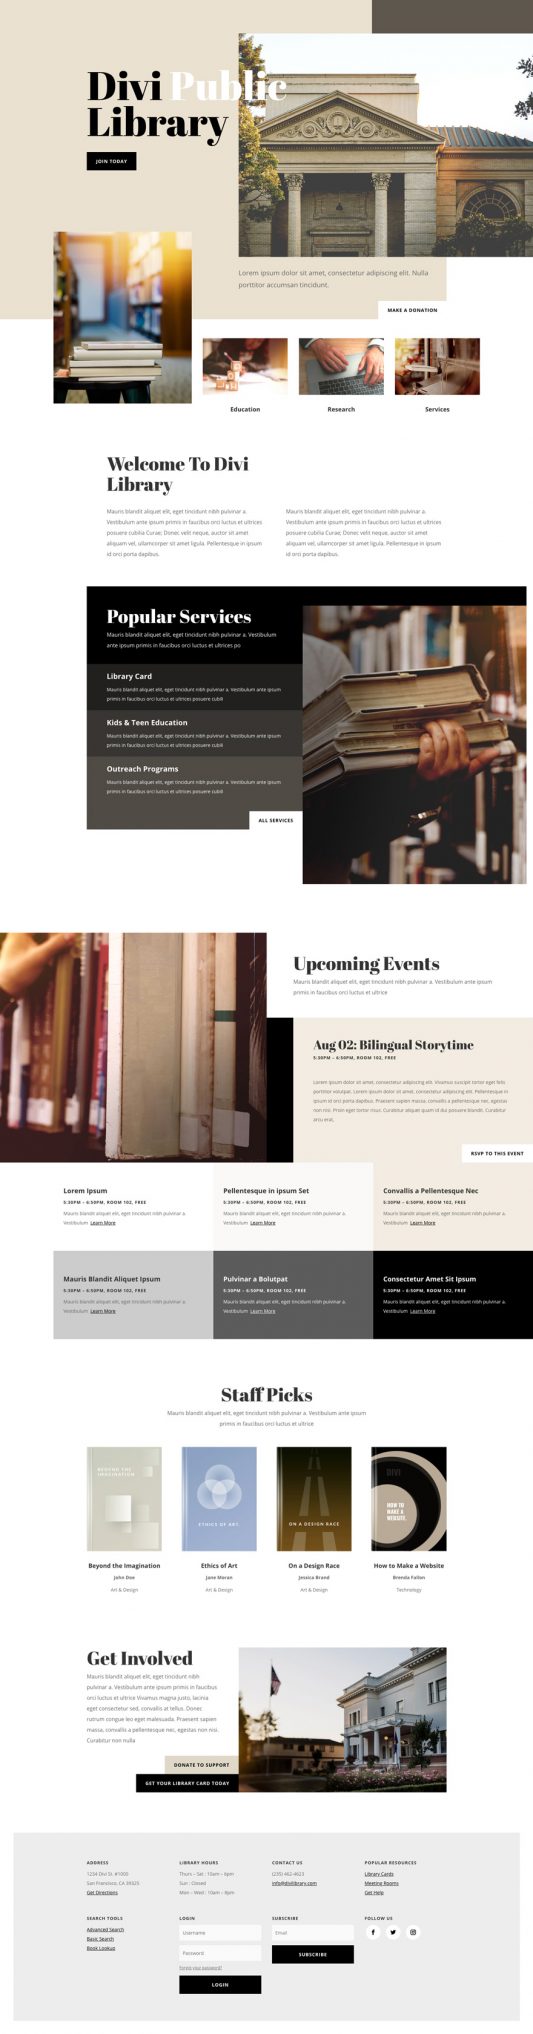 Library Landing Page